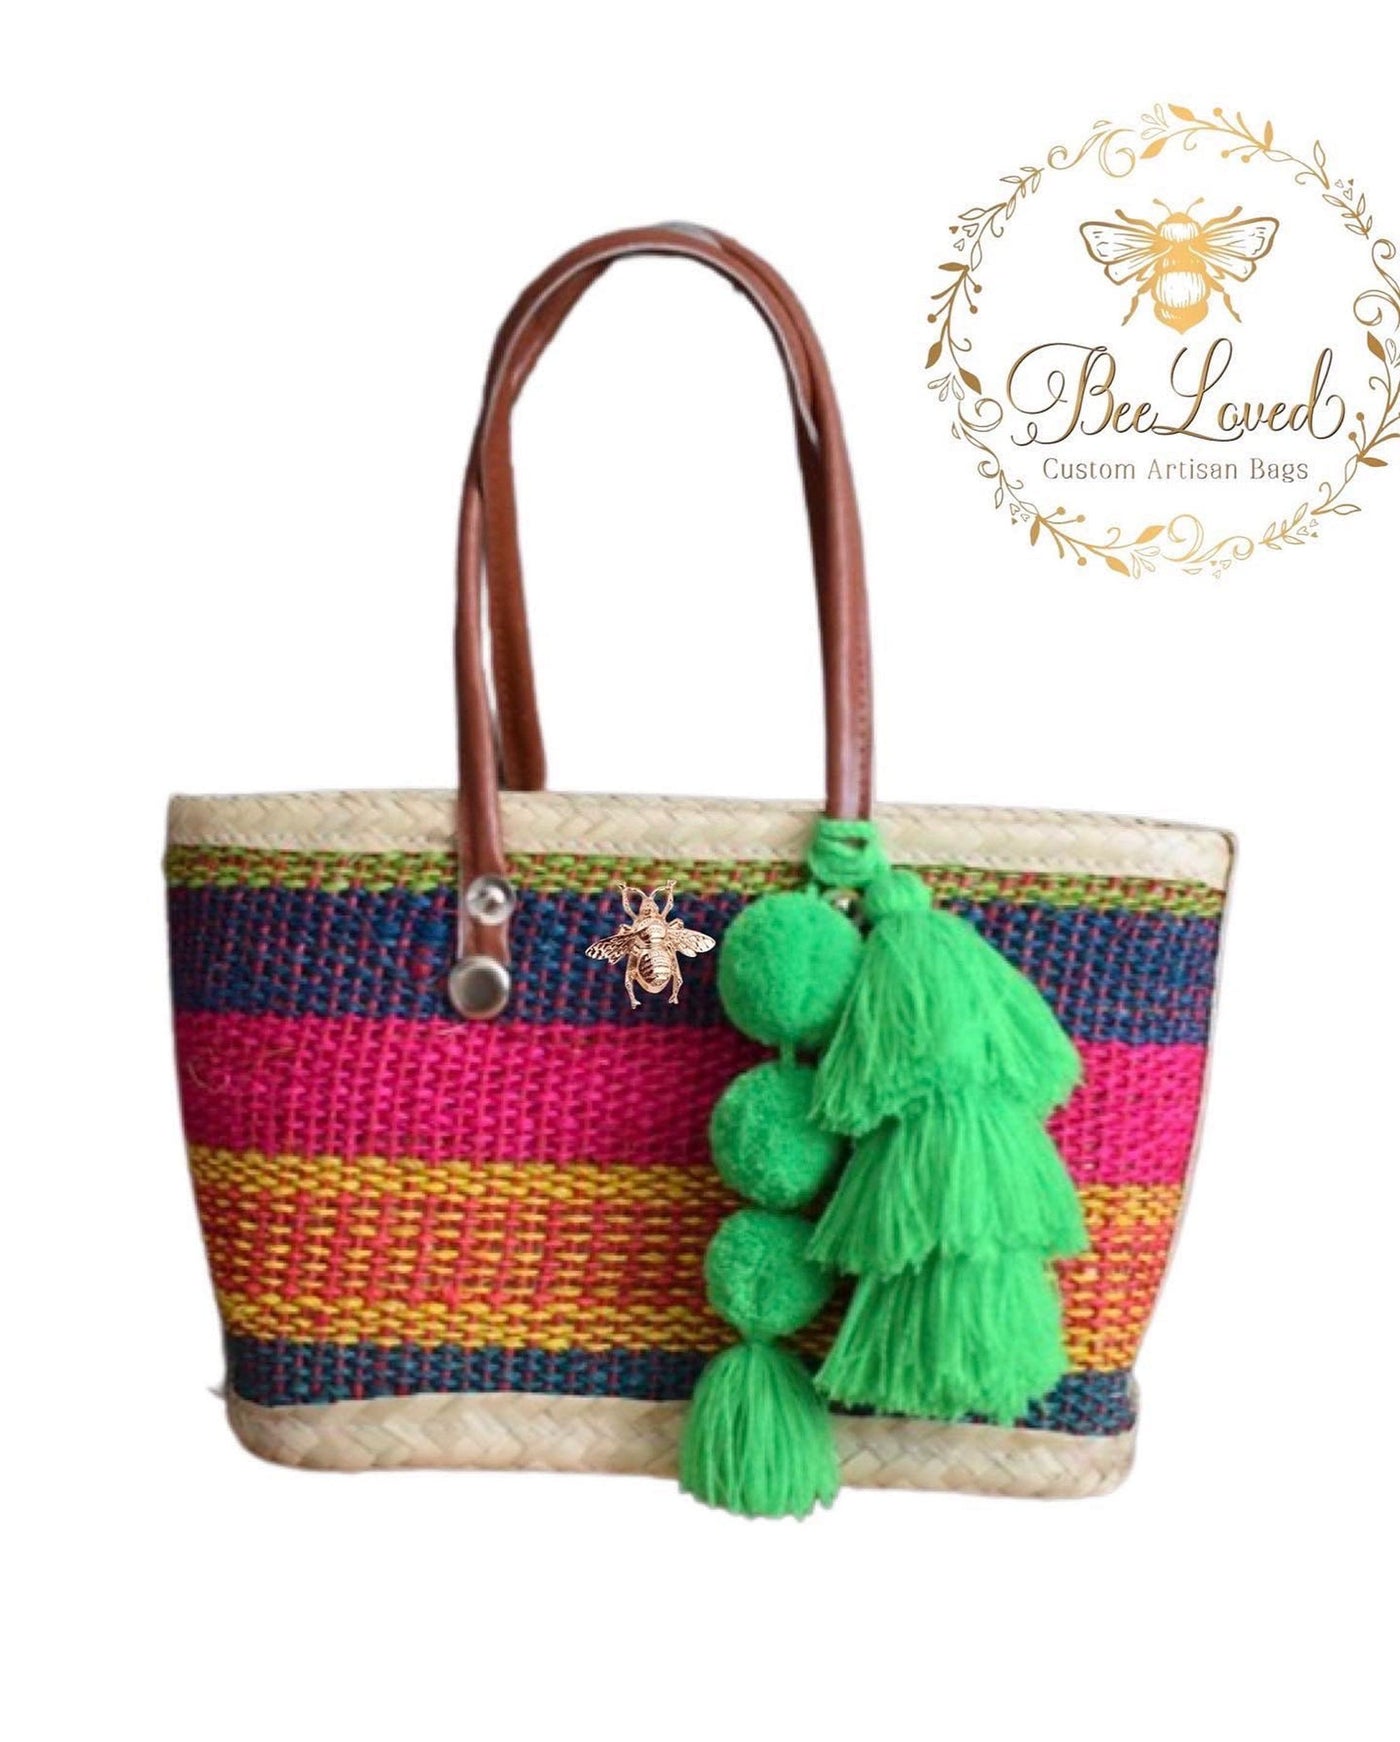 BeeLoved Custom Artisan Bags and Gifts Henequen Agave Tote #1